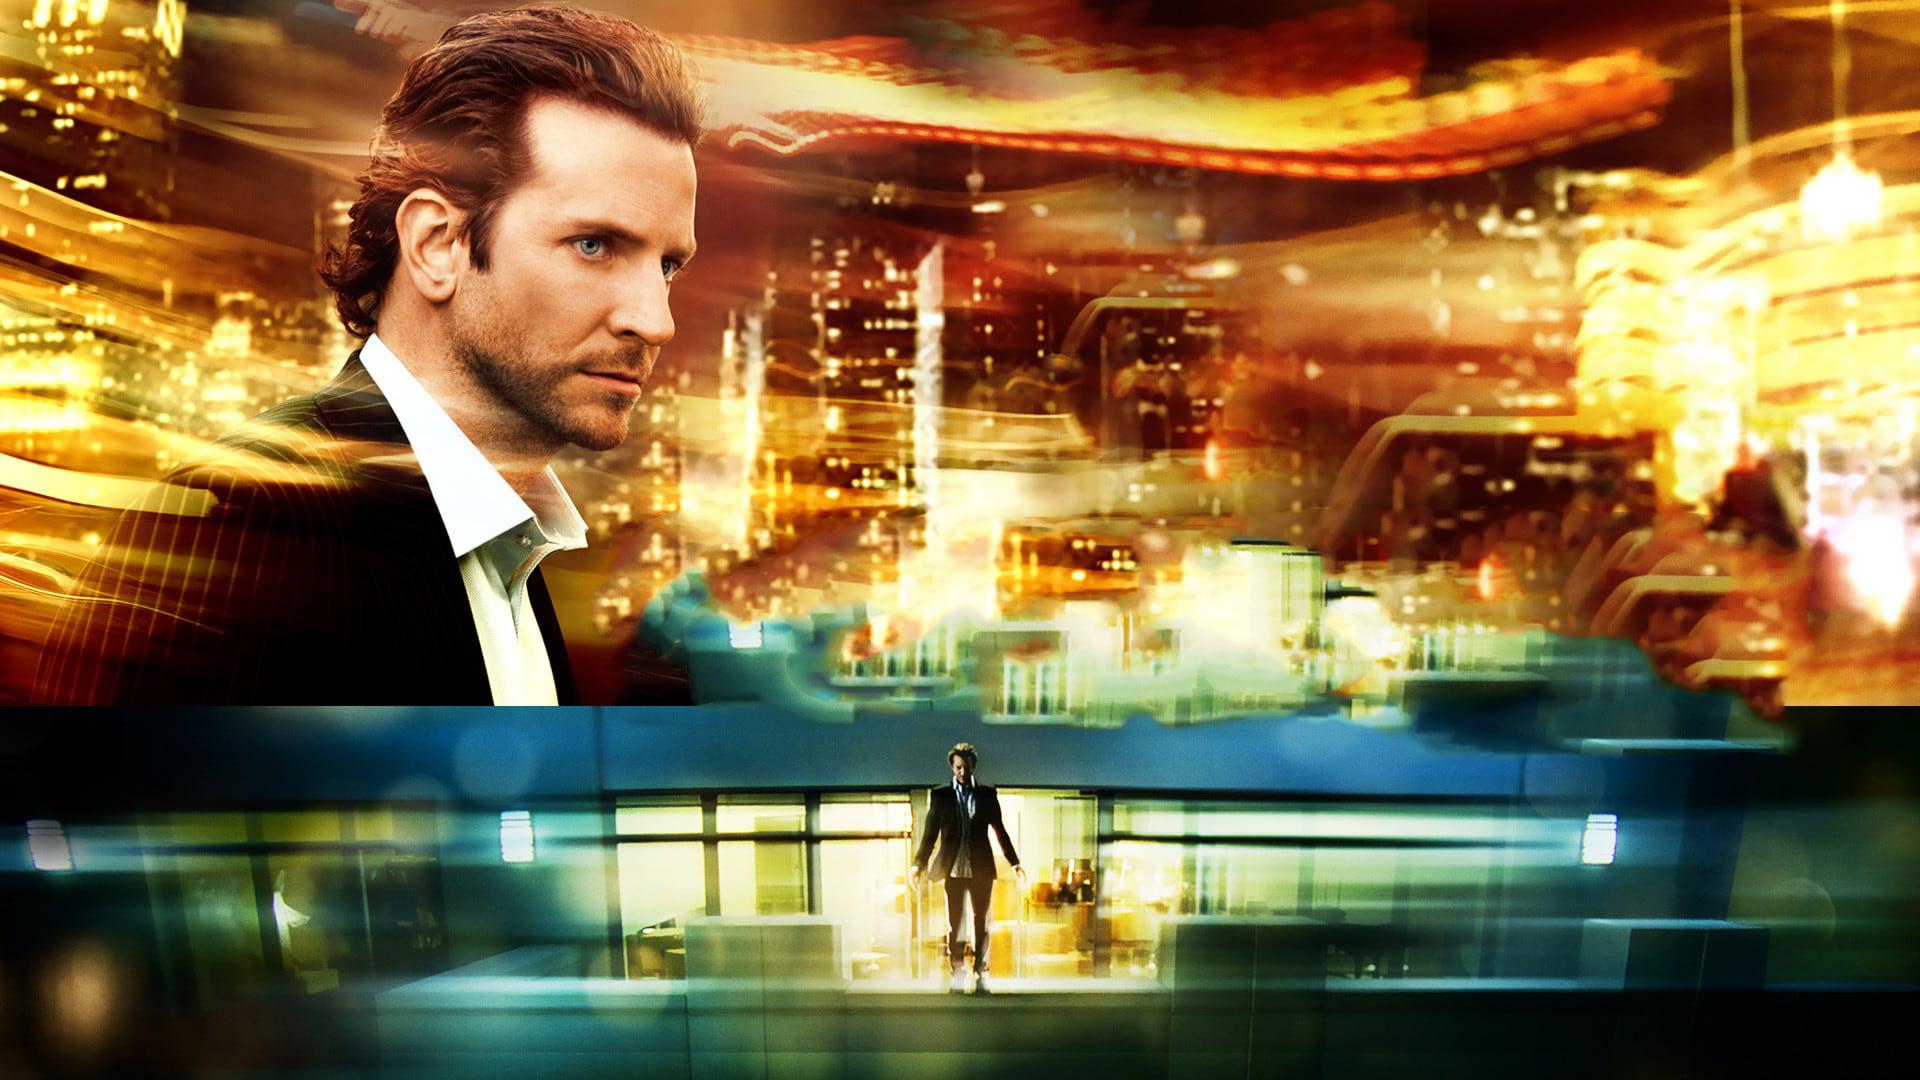 Backdrop Image for Limitless